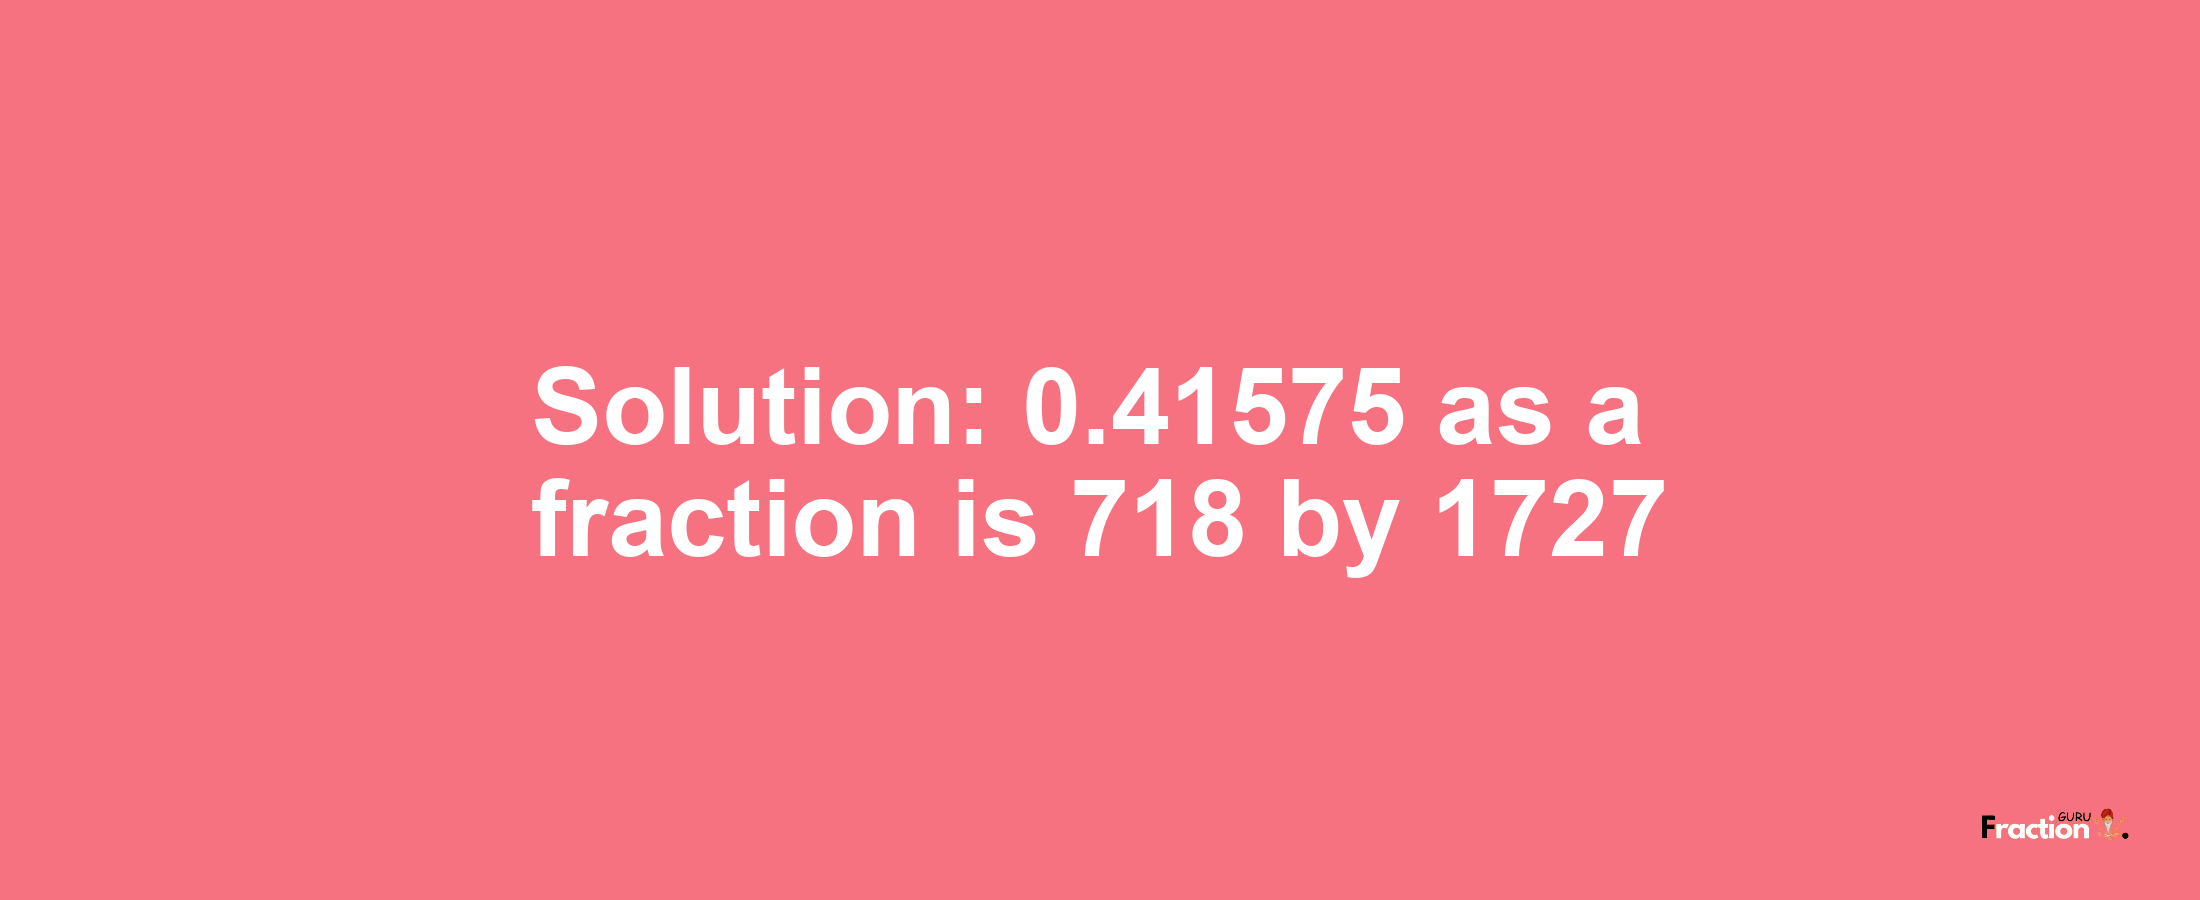 Solution:0.41575 as a fraction is 718/1727